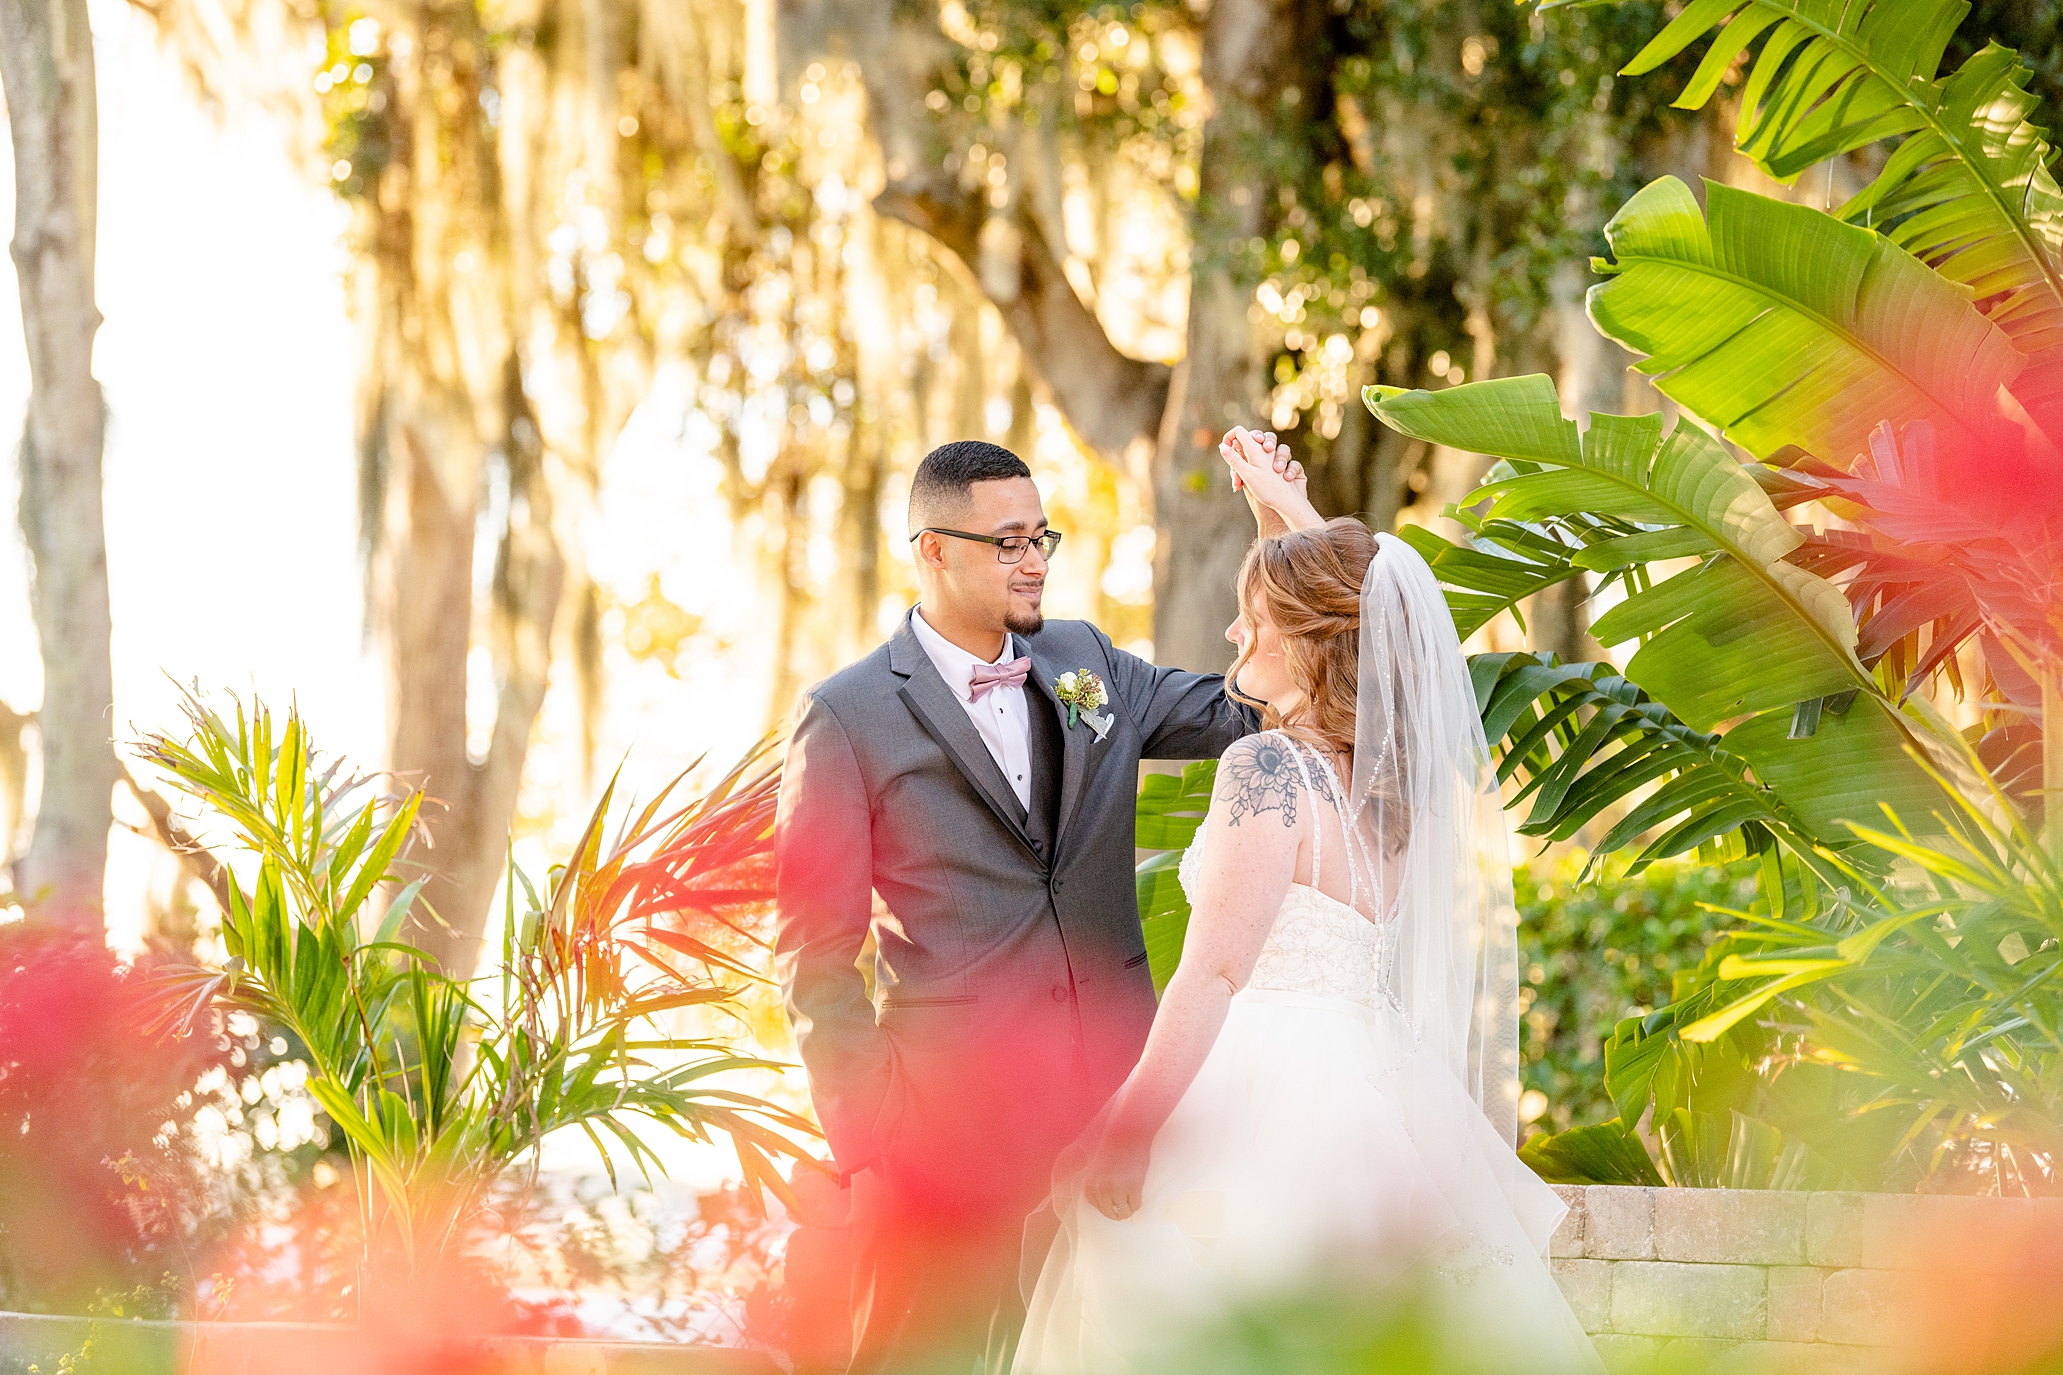 Light and Airy Wedding Photographer in Orlando